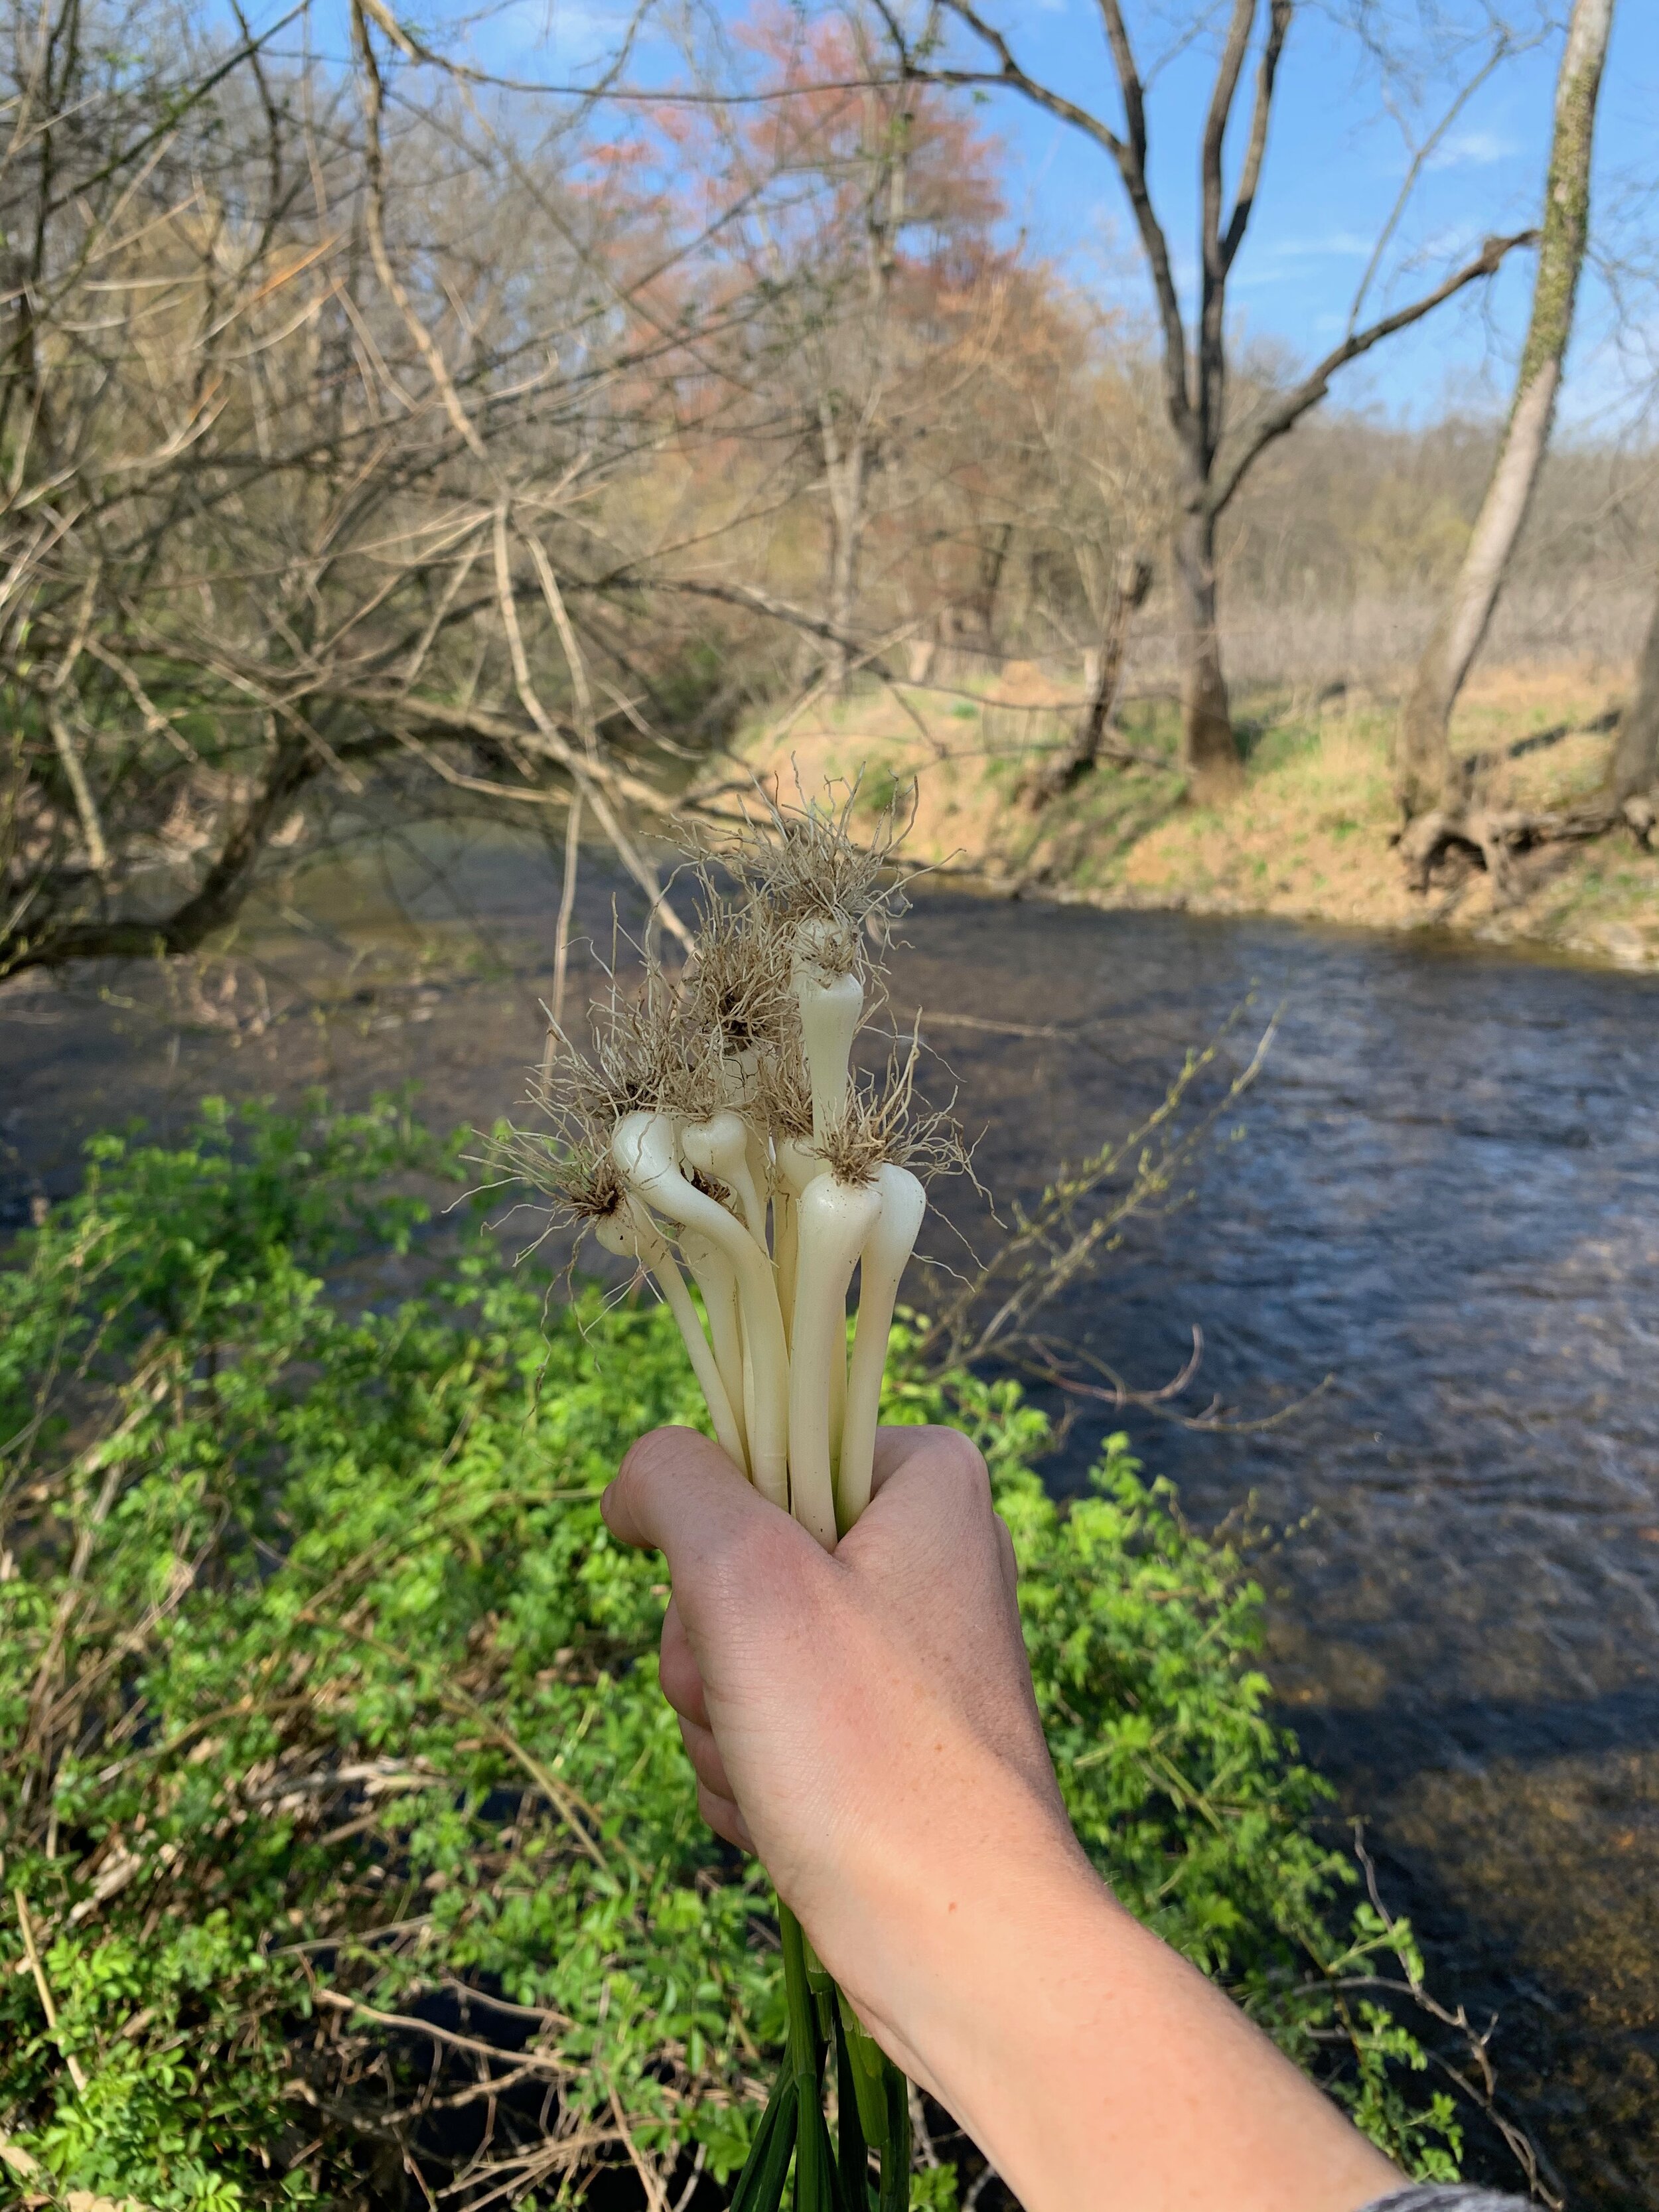  Wild onions growing by Goose Creek.  